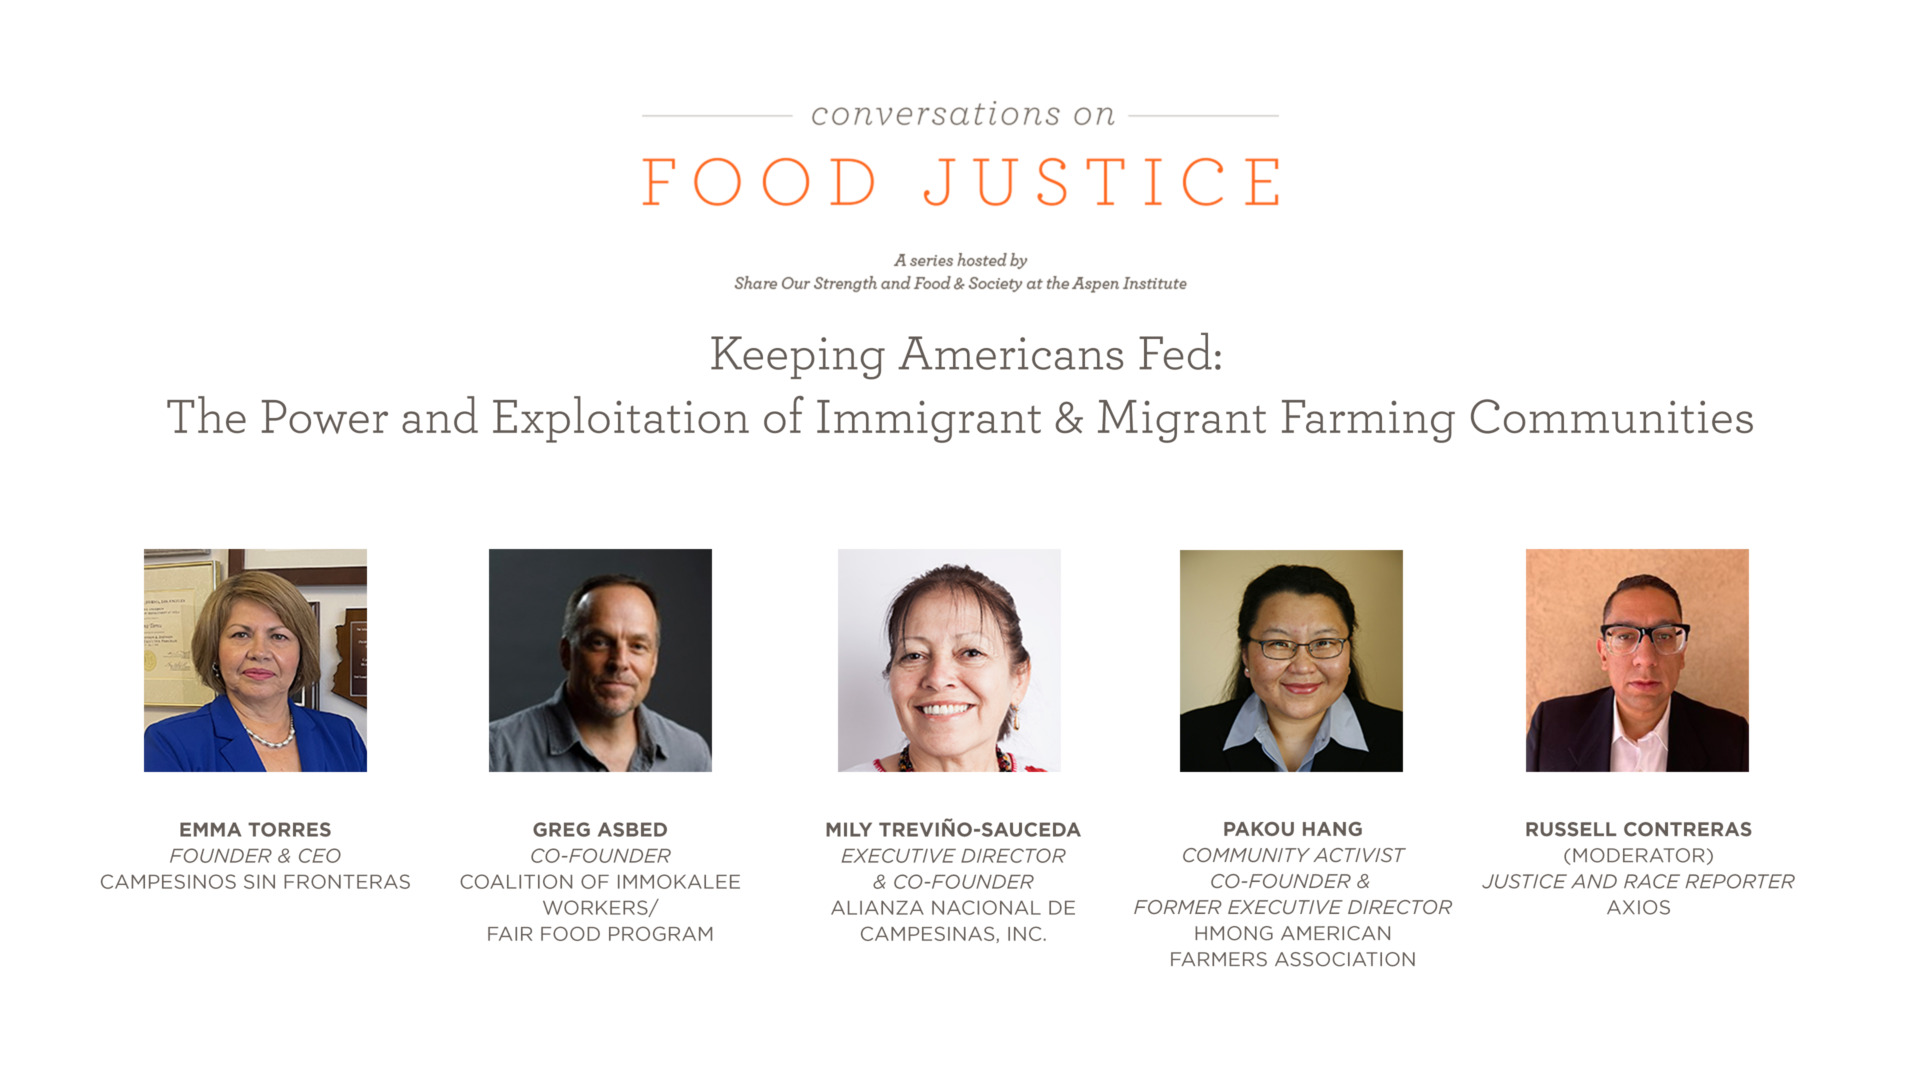 Keeping Americans Fed: The Power and Exploitation of Immigrant & Migrant Farming Communities